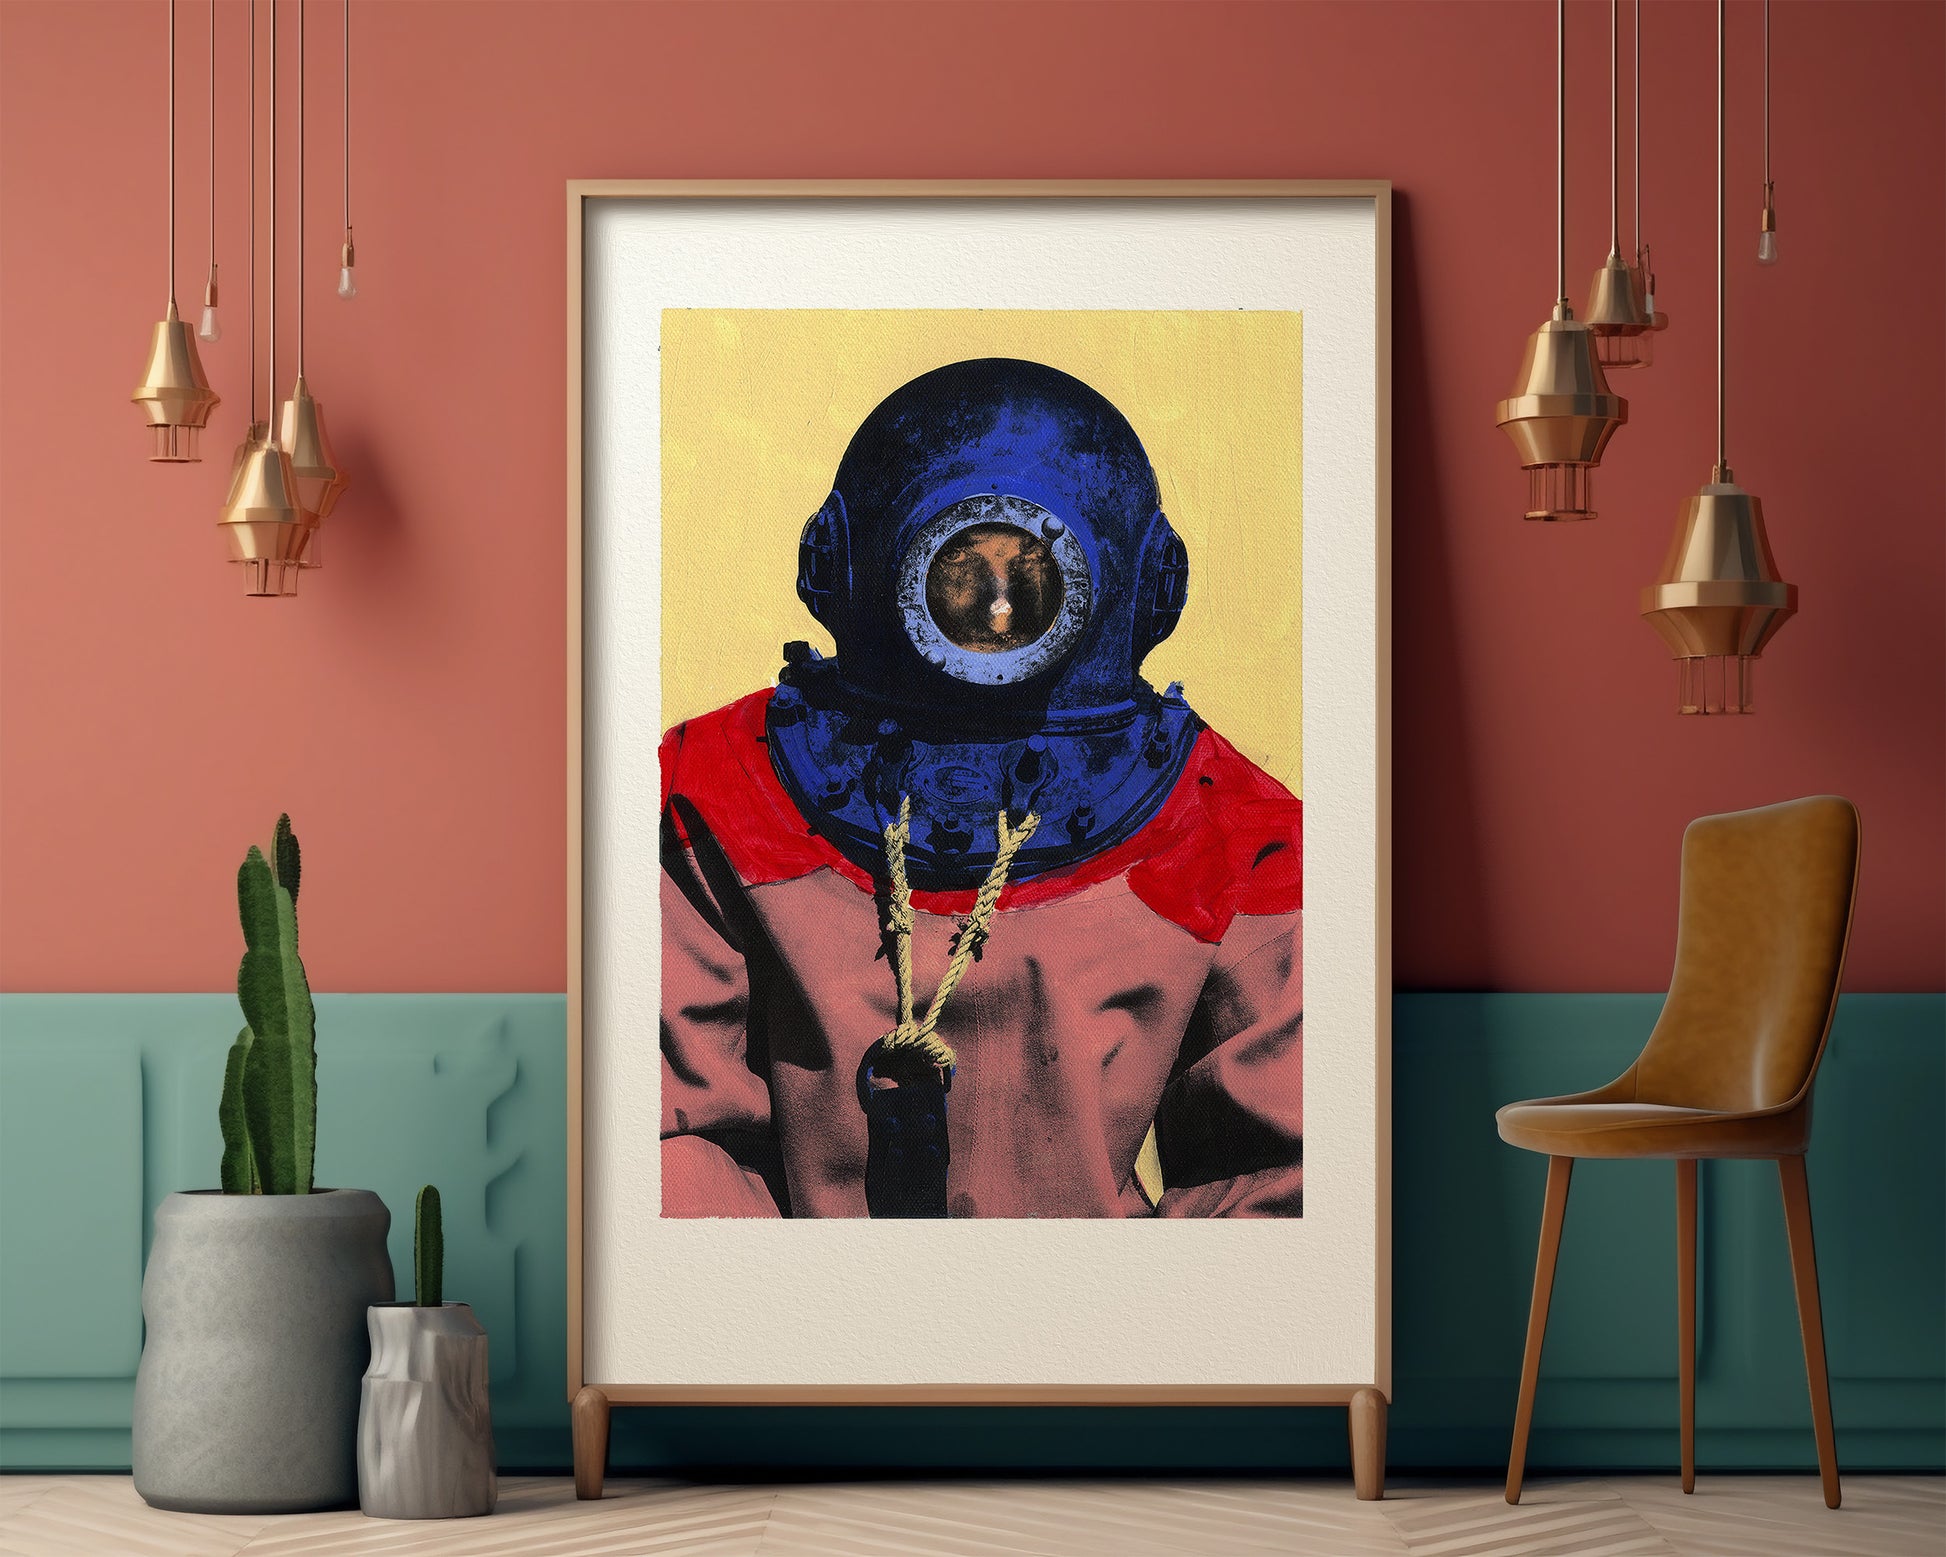 Painting Pop Art Wall Art from Greece | Canary & Blue sponge diver from Kalymnos island, by George Tatakis - inside an eclectic room